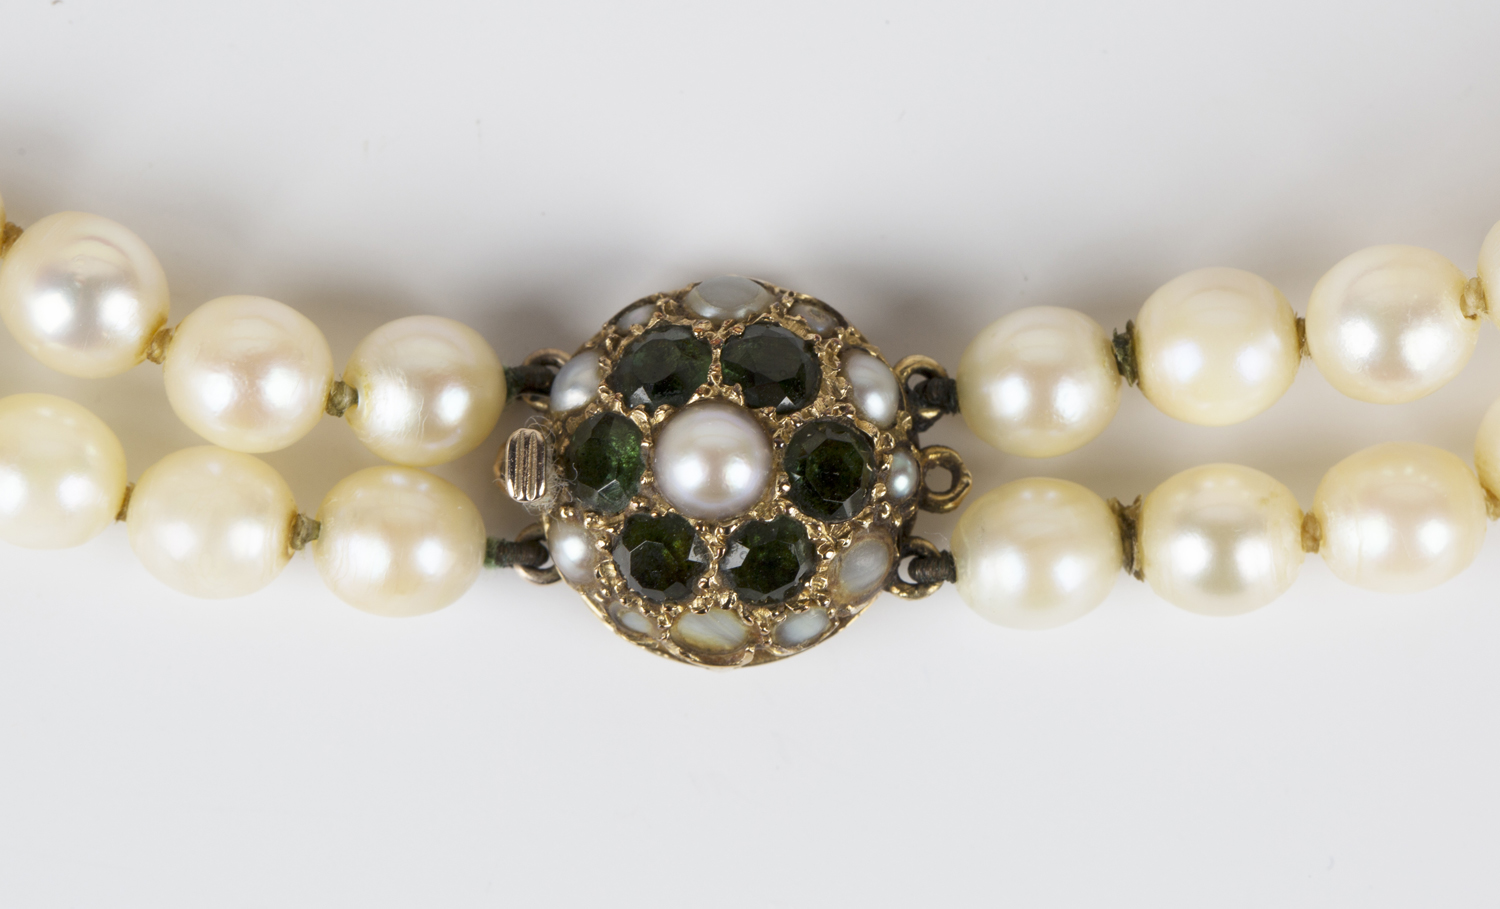 A two row necklace of graduated cultured pearls with a 9ct gold, green gemstone and half-pearl set - Image 2 of 2